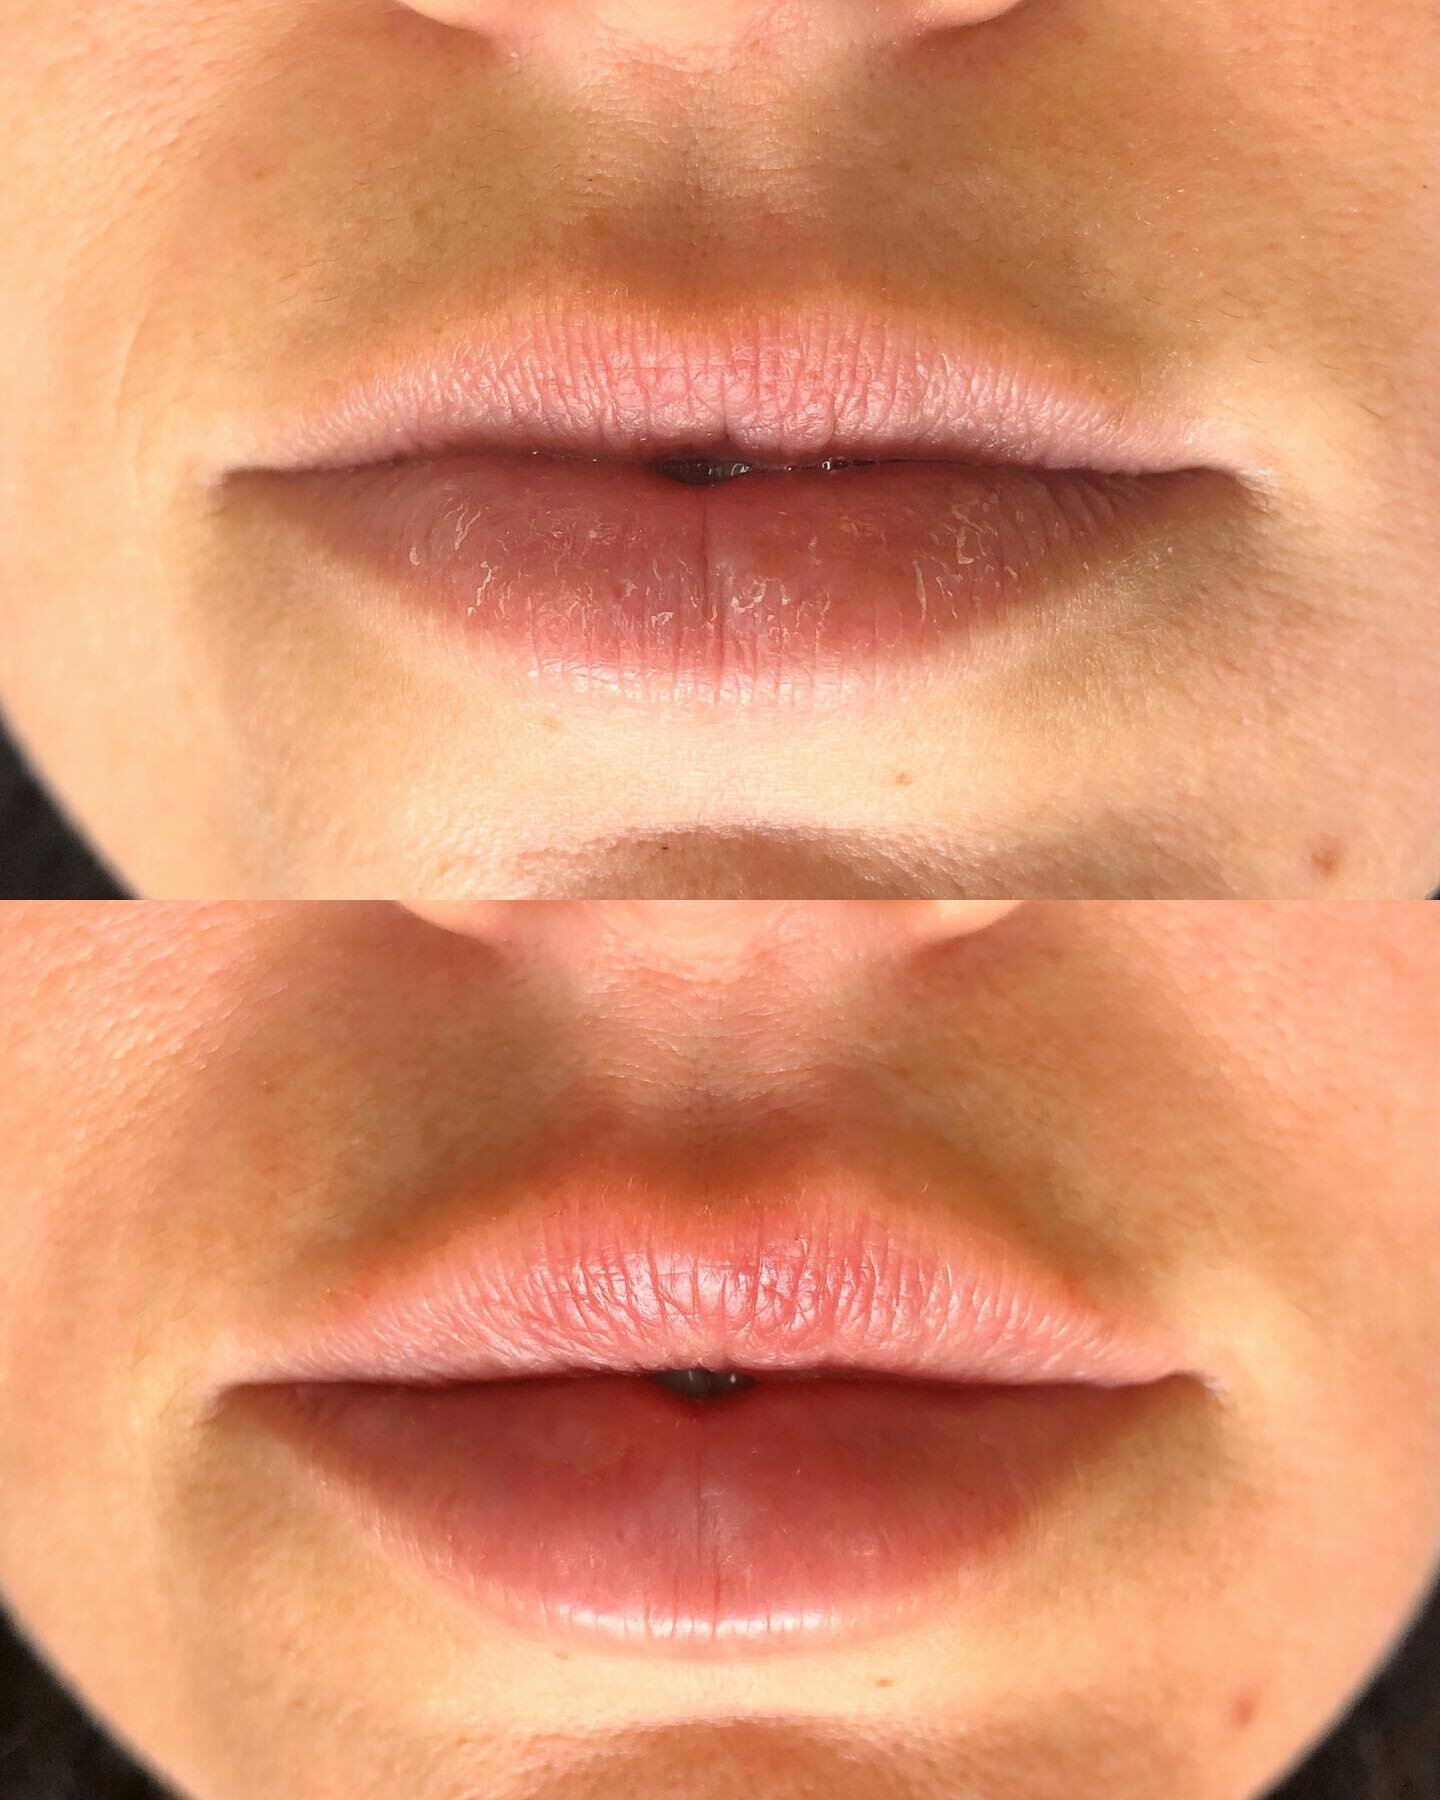 Fewer filters 👏🏻 More fillers 👏🏻 Obsessed with this natural before and after lip enhancement 😍💕 *chef&rsquo;s kiss*